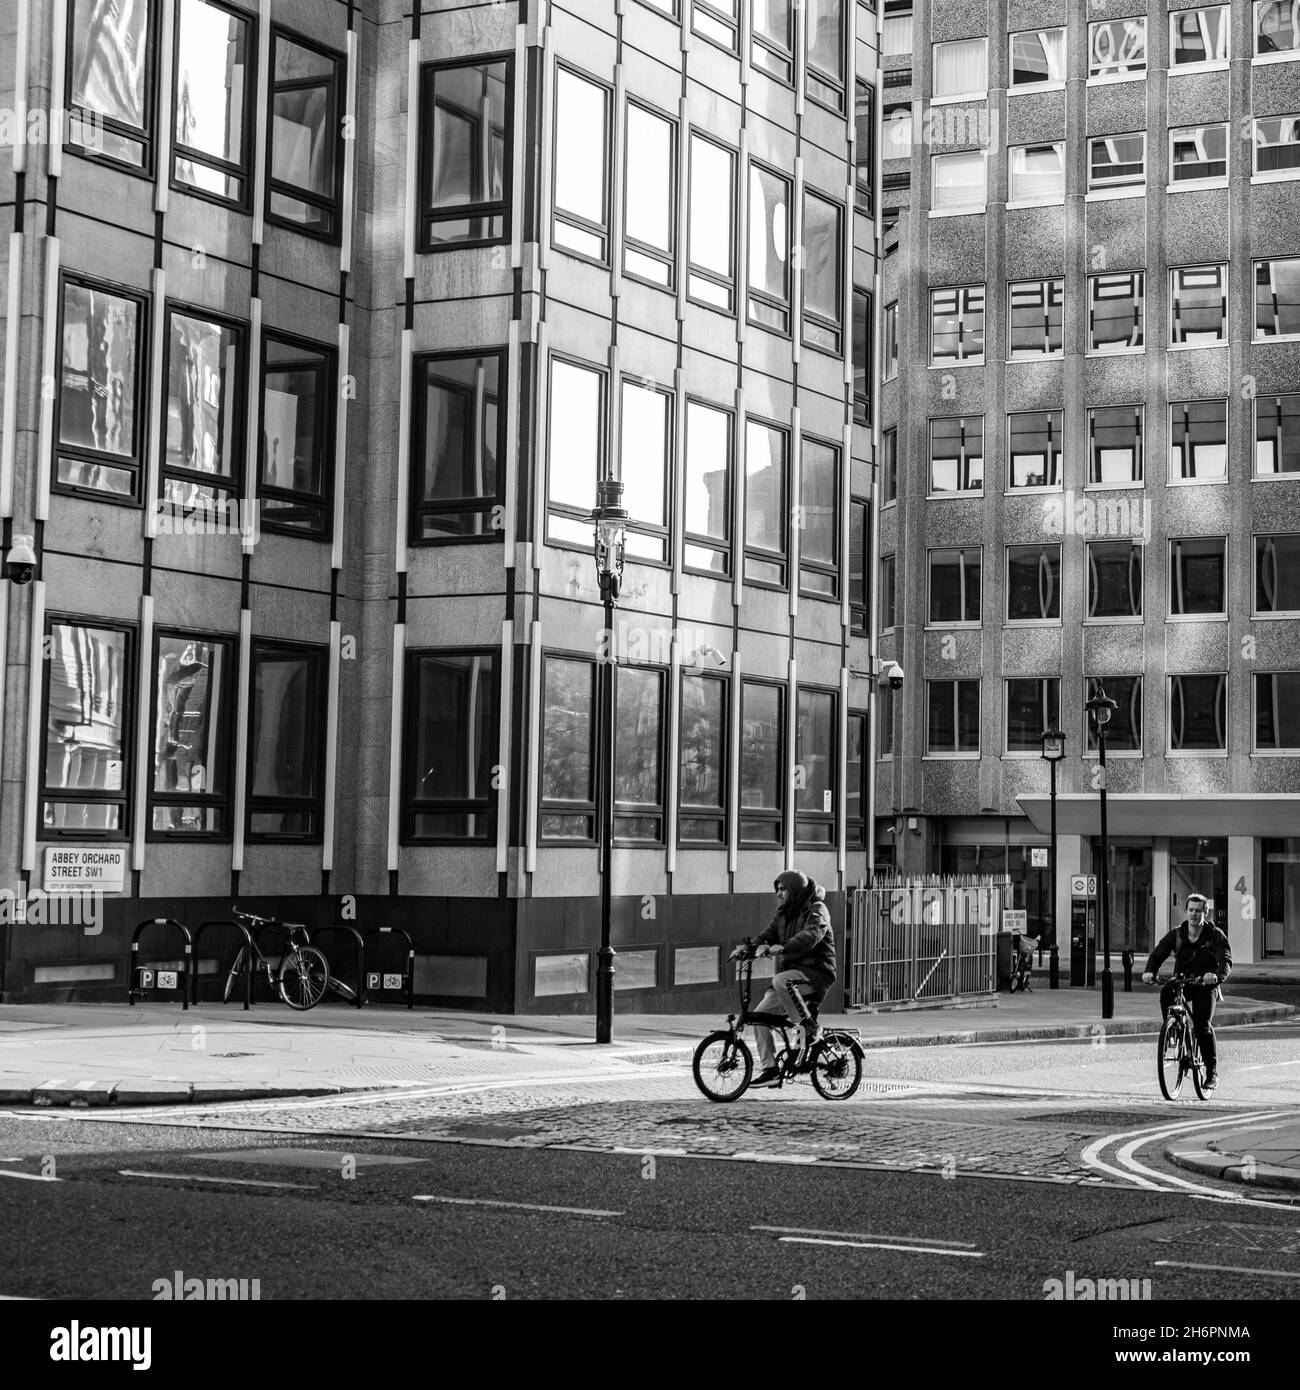 Victoria street london Black and White Stock Photos & Images - Alamy